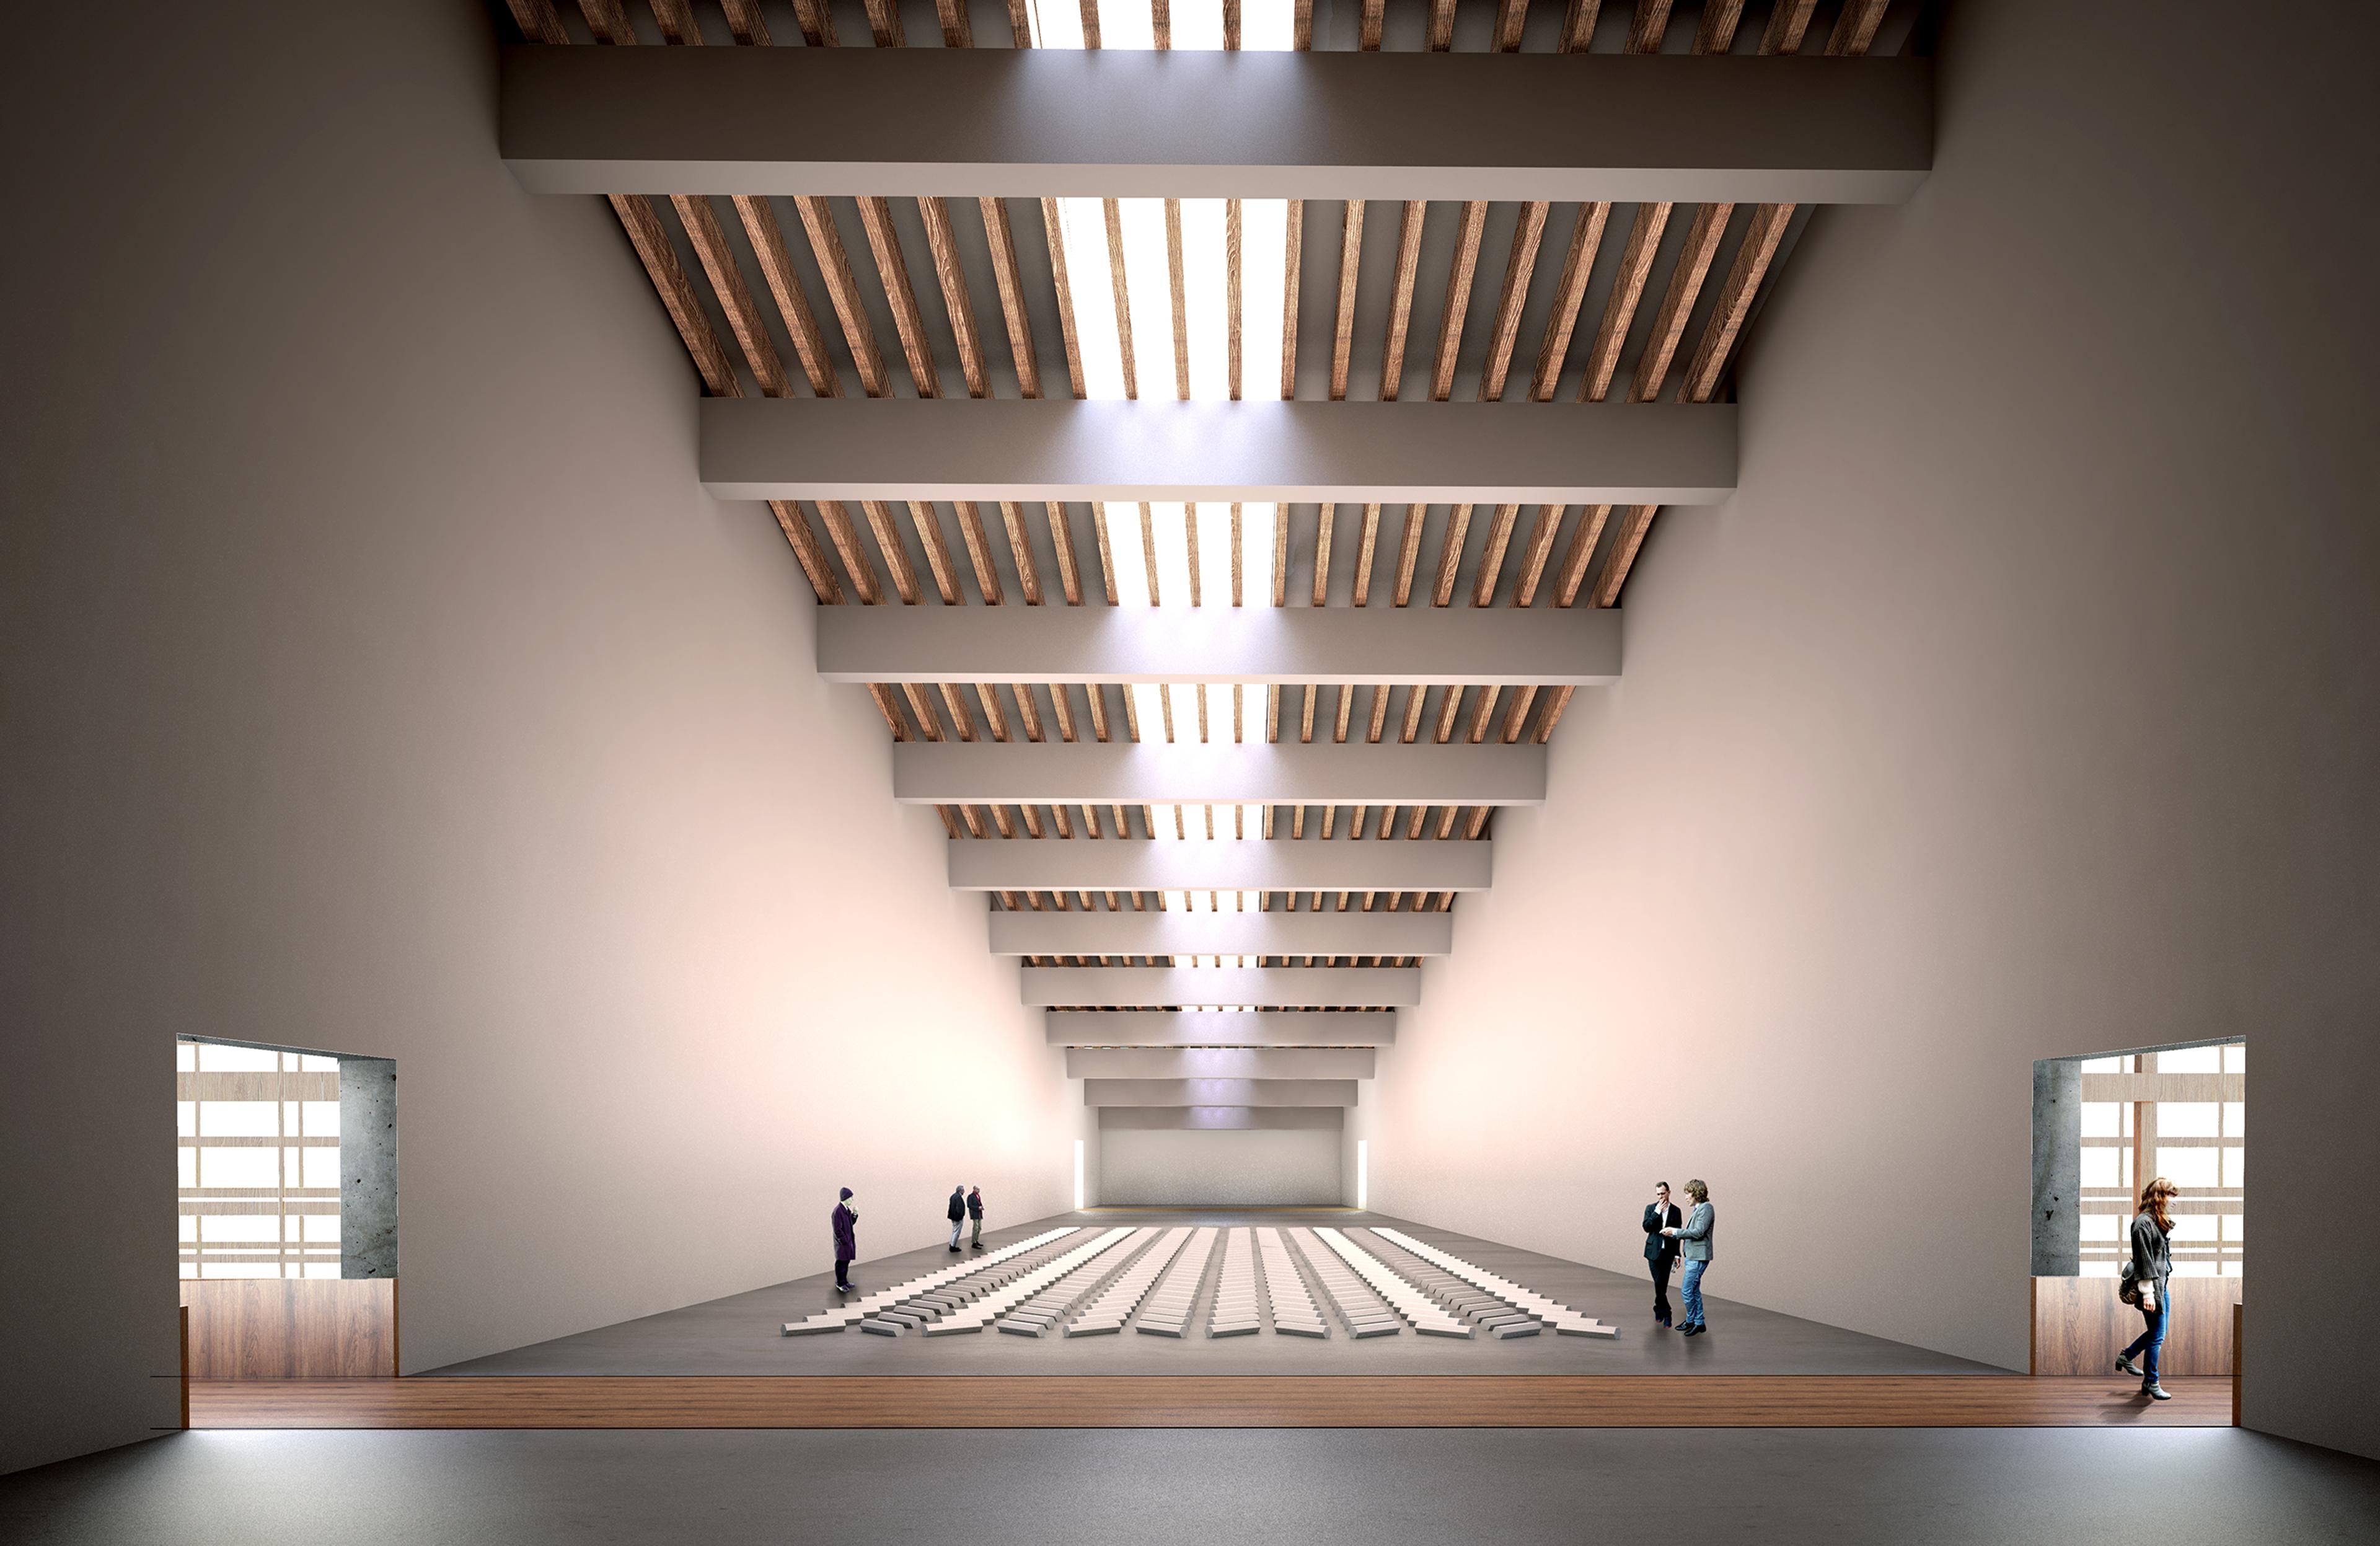 Architectural rendering of a museum structure with high ceilings